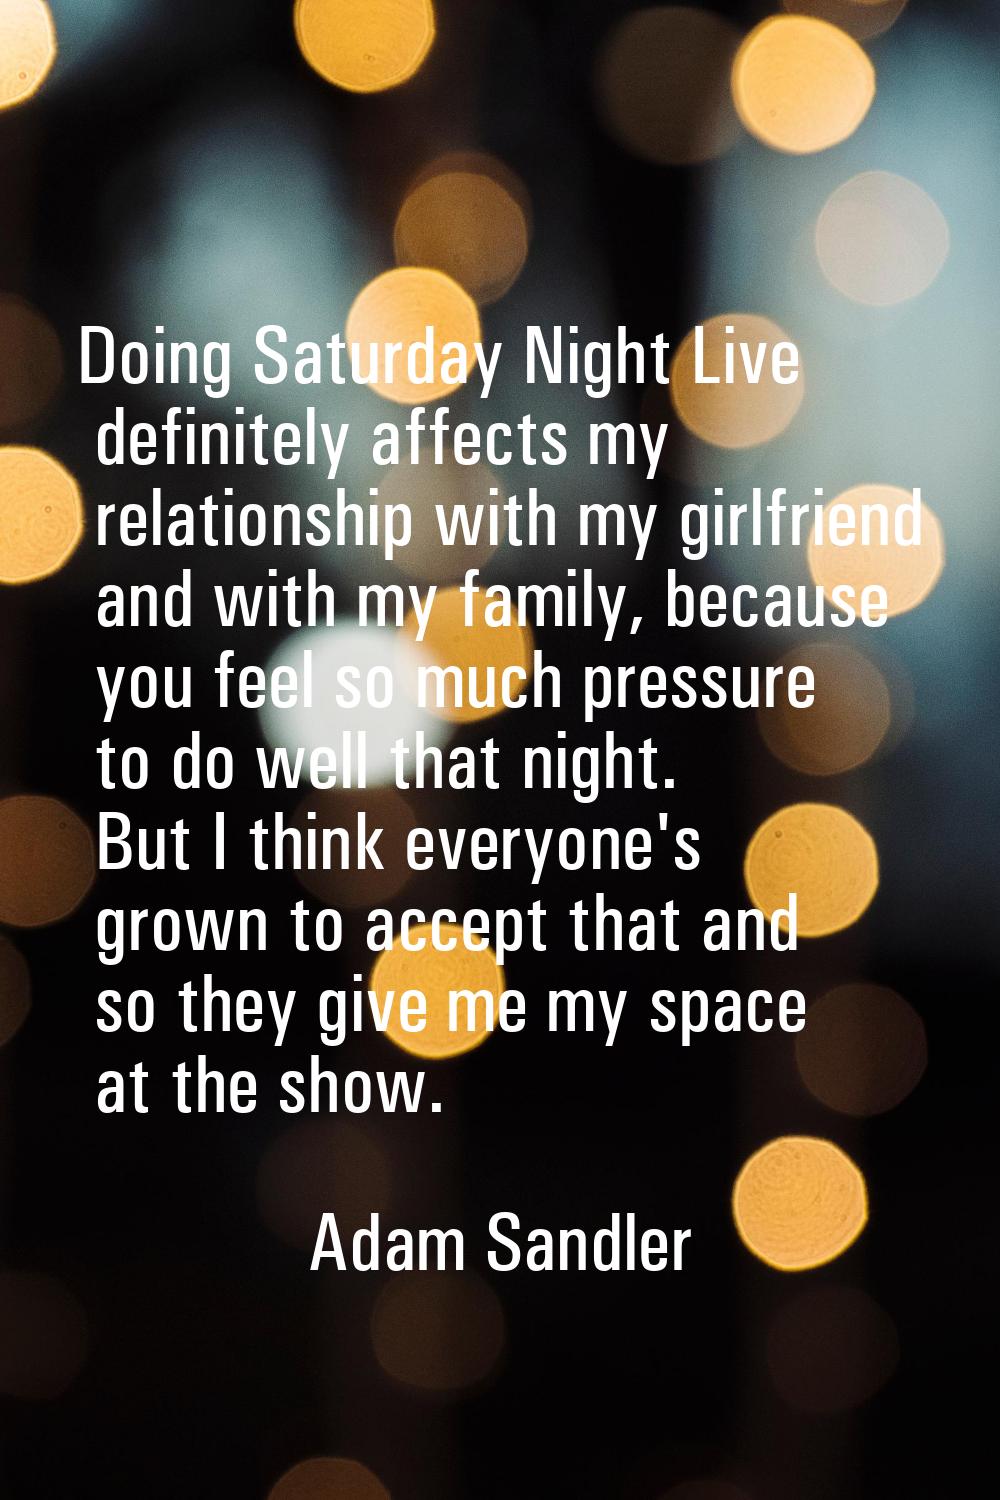 Doing Saturday Night Live definitely affects my relationship with my girlfriend and with my family,